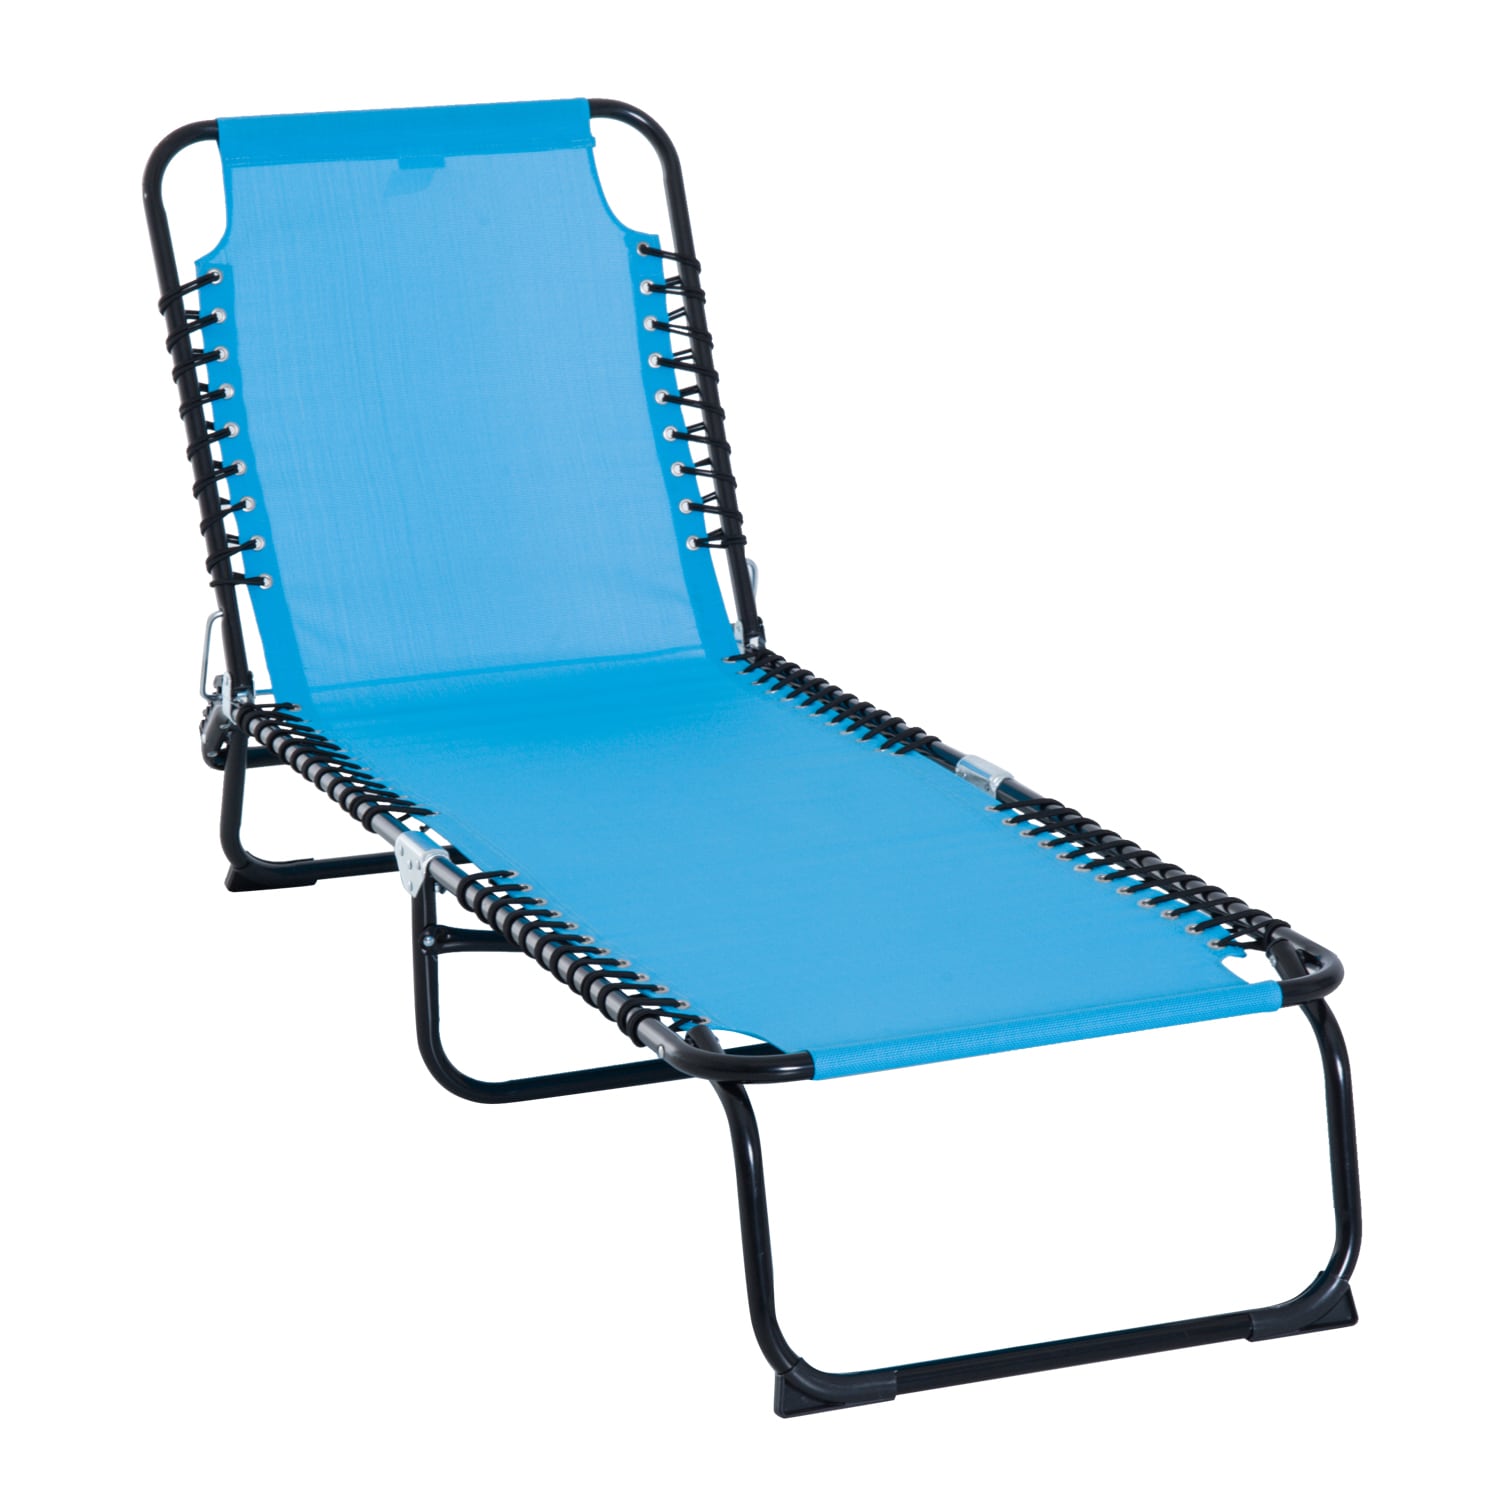 Outsunny Folding Beach Chair Chaise Lounge Adjustable Positions, Cream ...